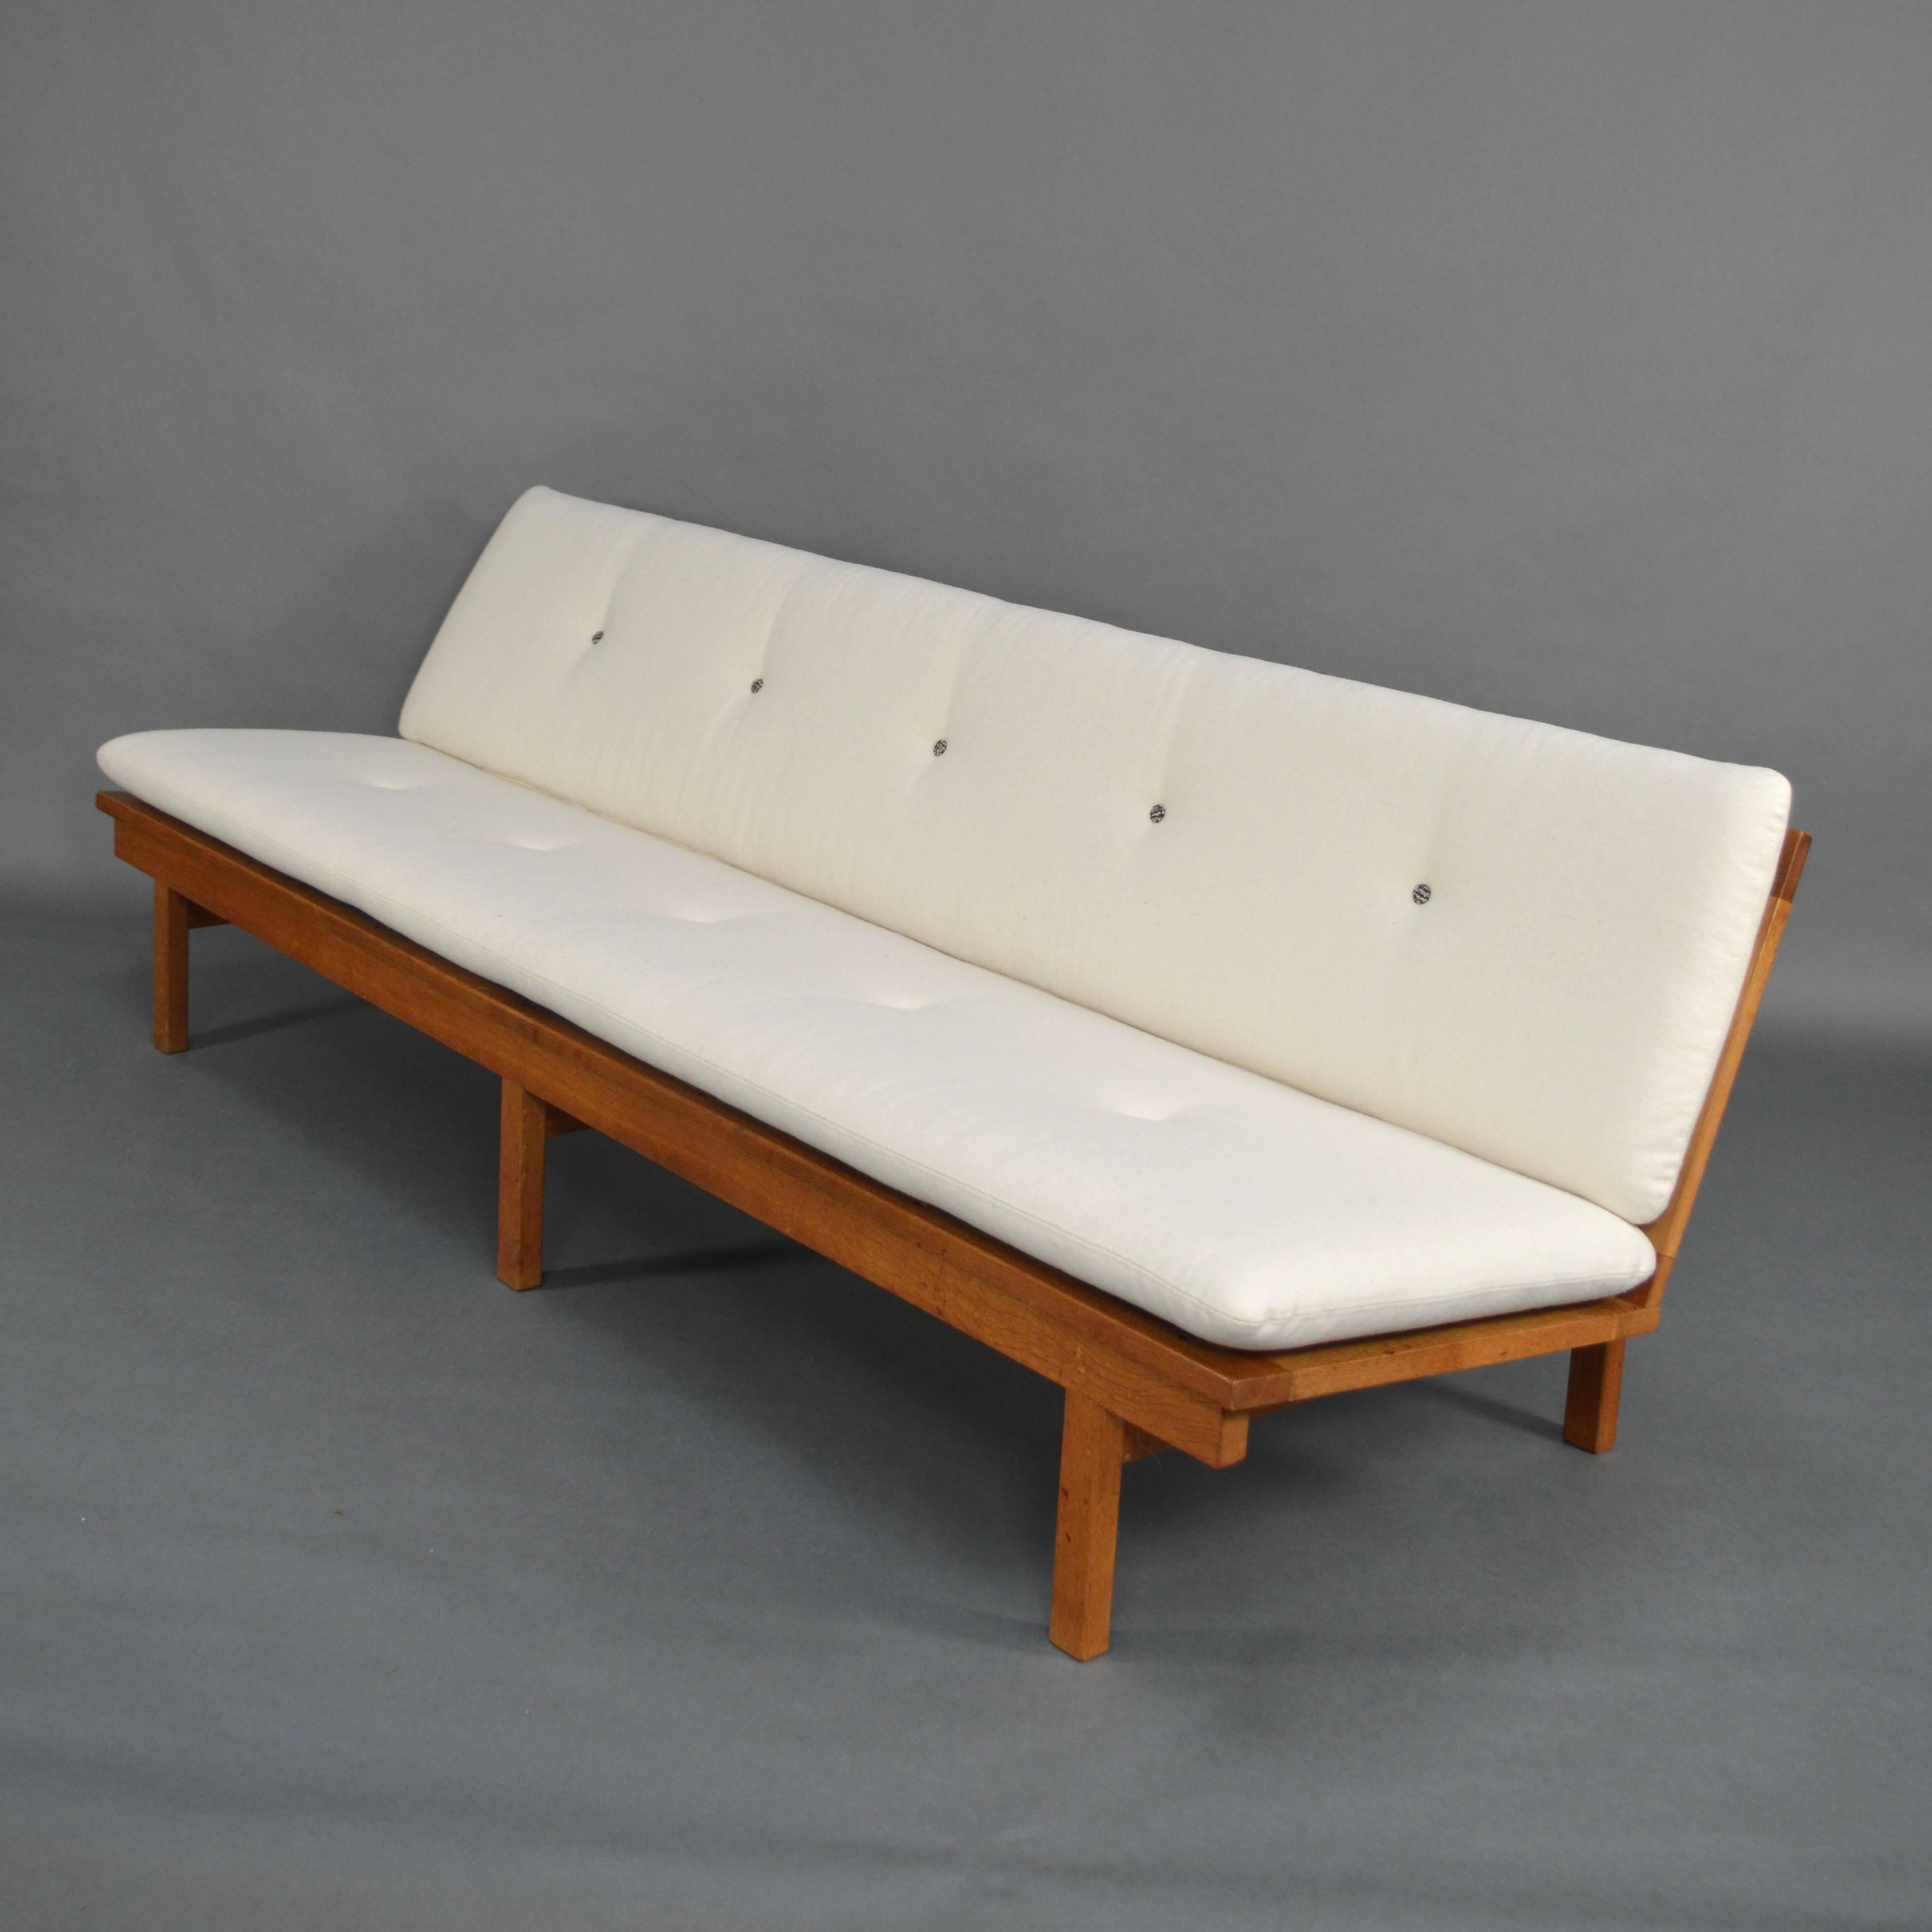 Model 2219 sofa in oak with new upholstery and foam filling in the cushions.

Beautiful trendy crème white felt fabric. The buttons have a different color on each side so the cushions can be used on both sides.
In excellent condition.